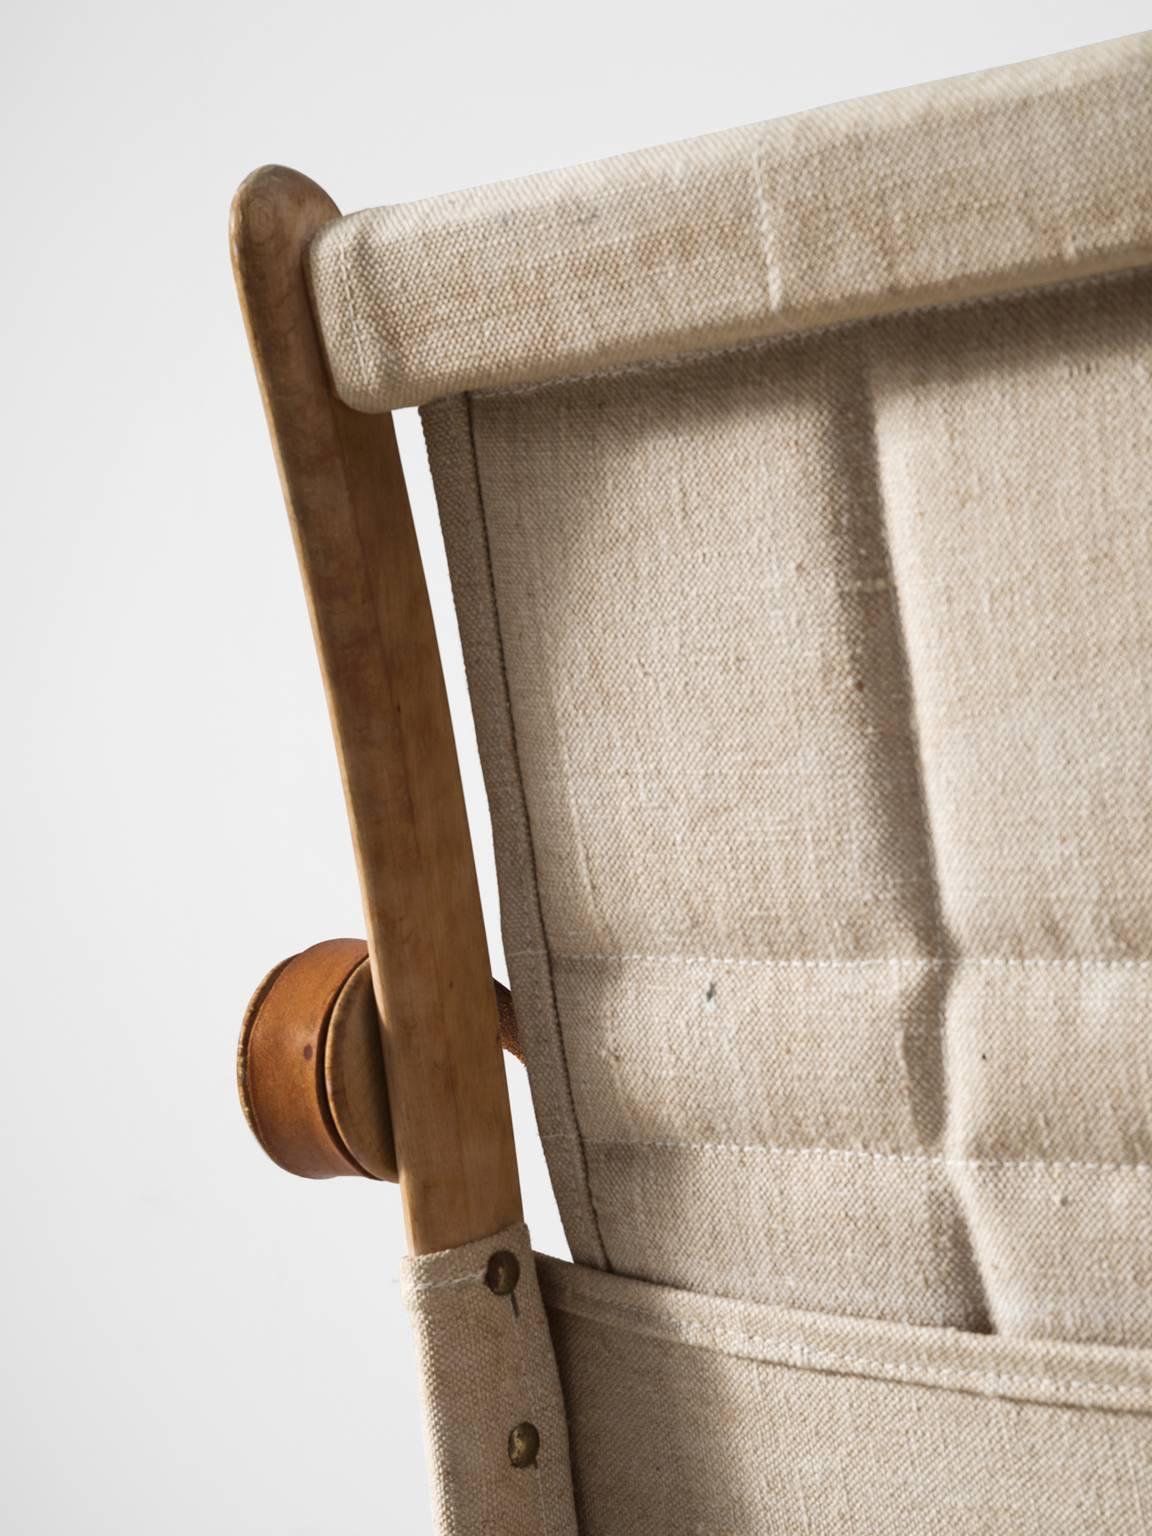 Mid-20th Century Scandinavian Safari Folding Chair in Beech and Canvas Upholstery